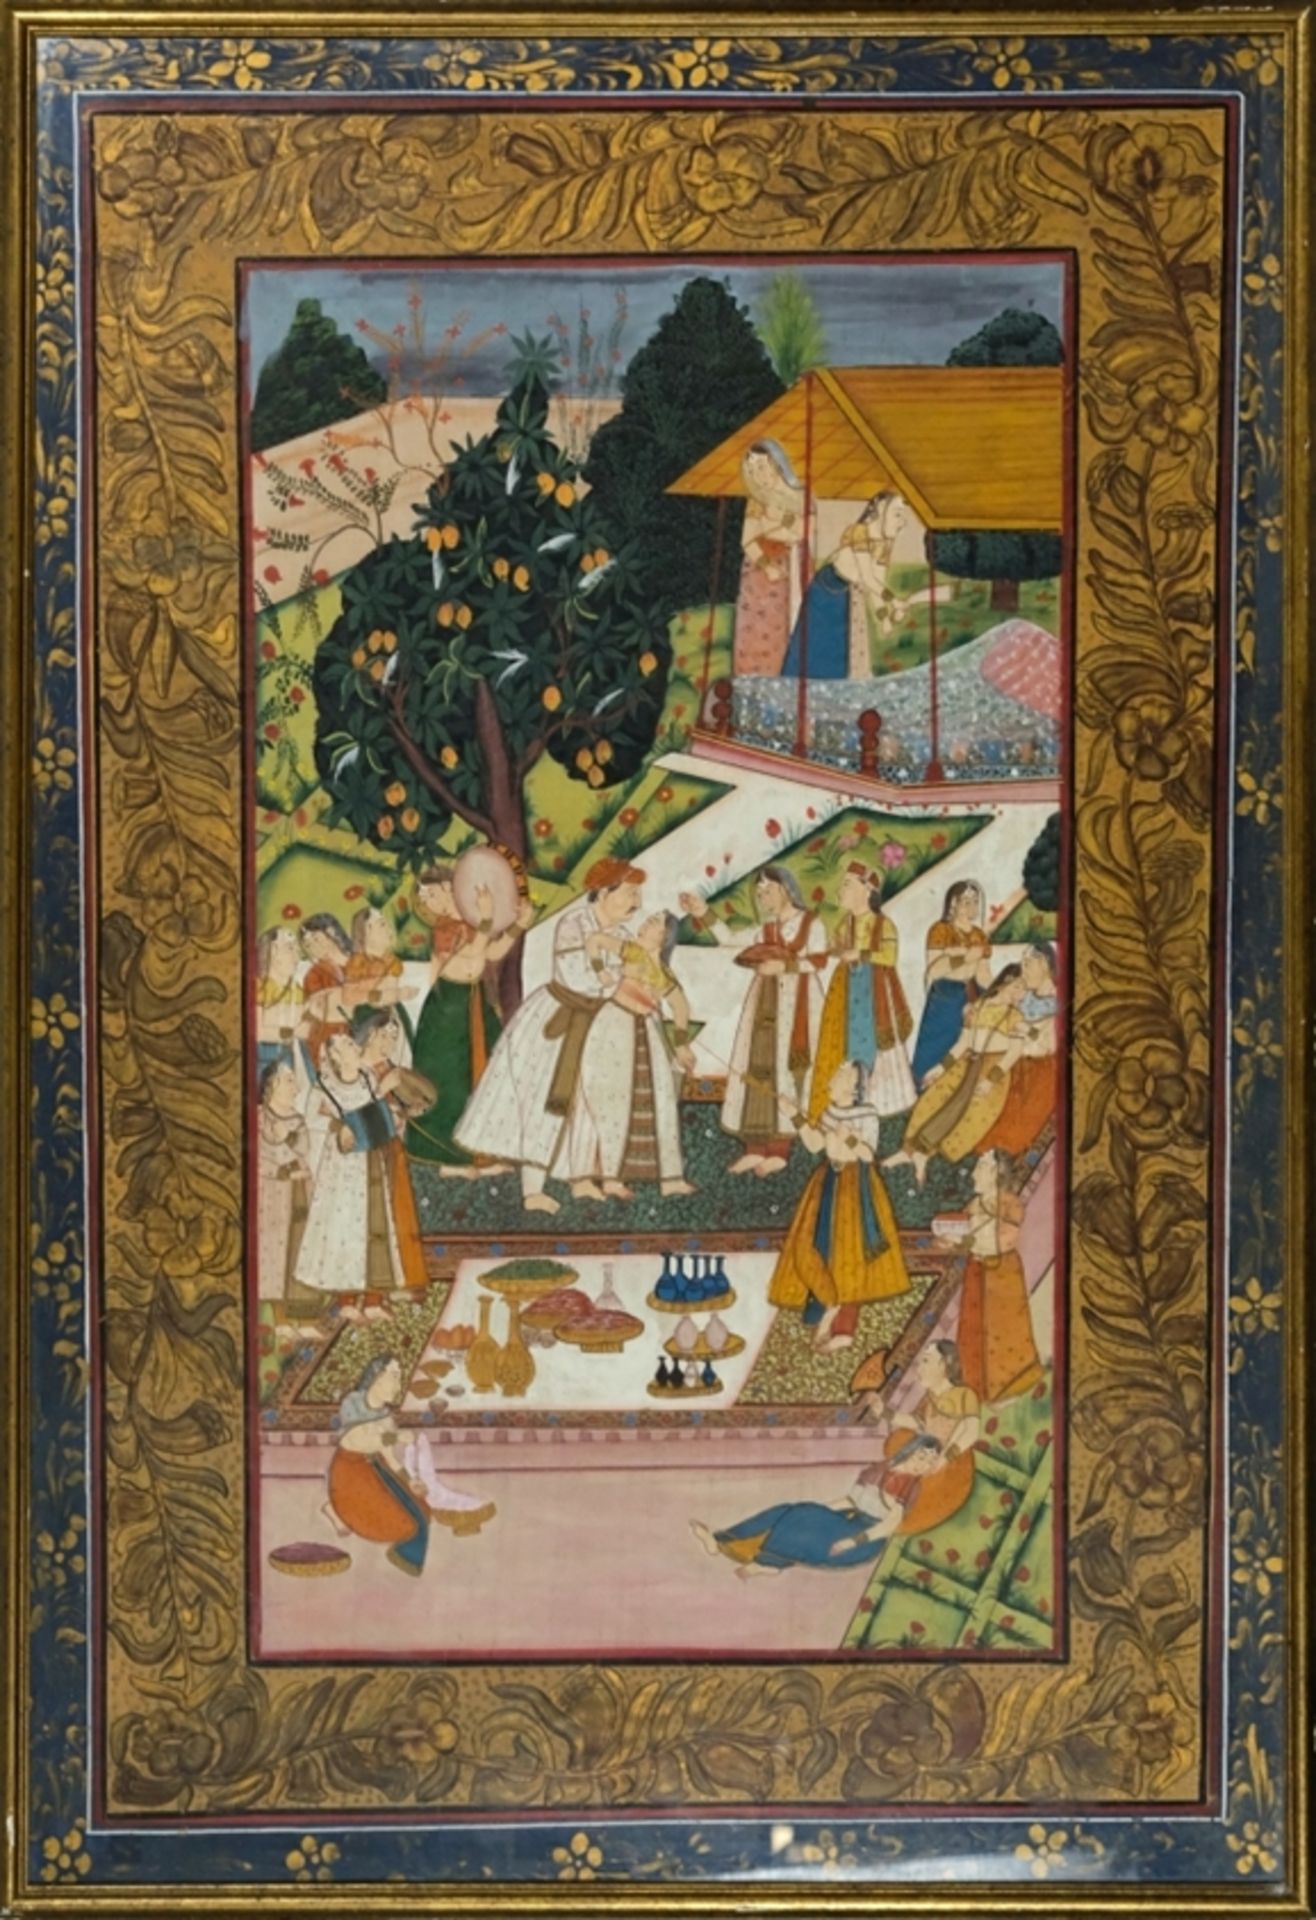 India, wedding scene at the court of a Mughal ruler, opaque colours on silk, probably 19th century.